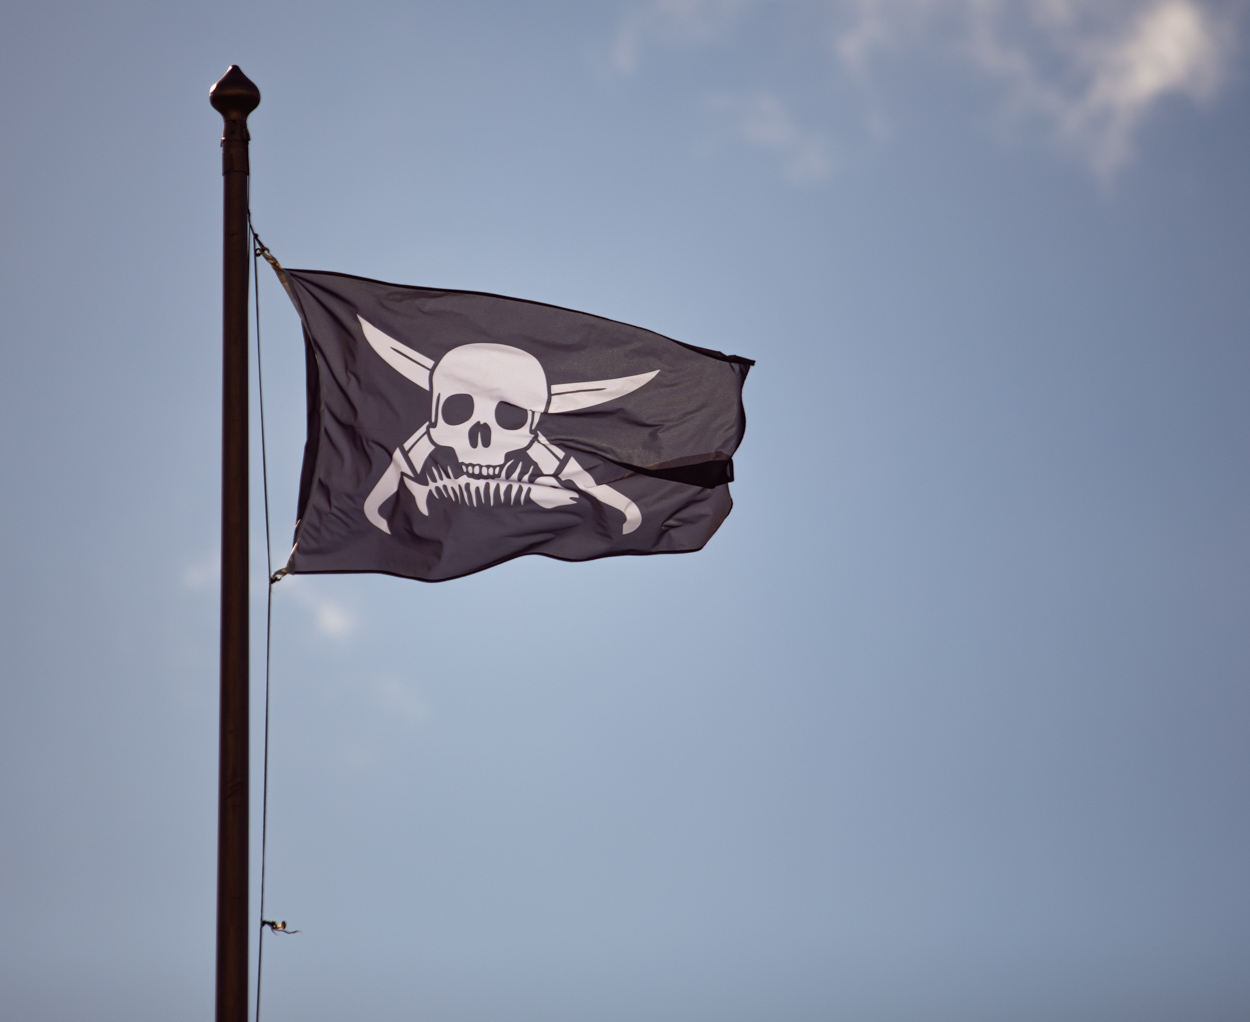 The Pirate Flag